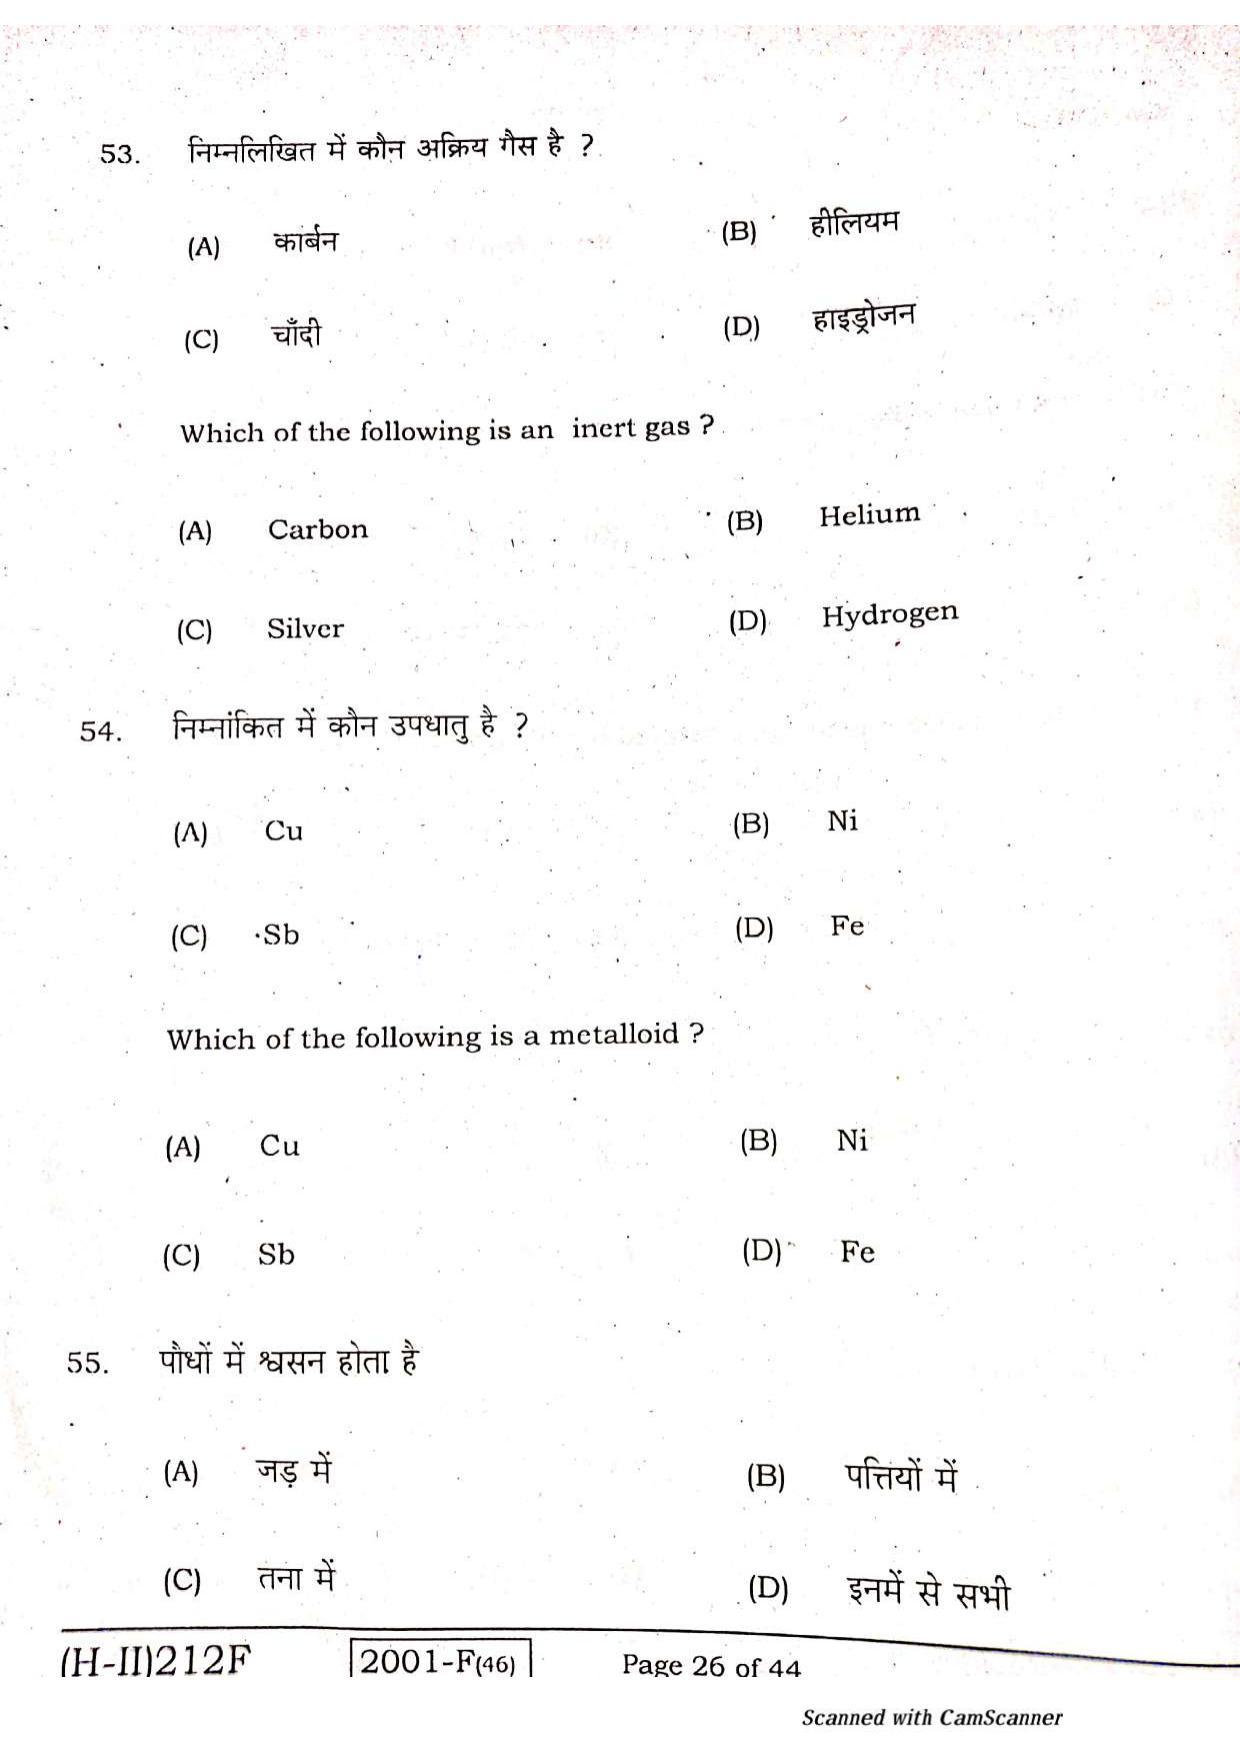 Bihar Board Class 10 Science 2021 (2nd Sitting) Question Paper - Page 24